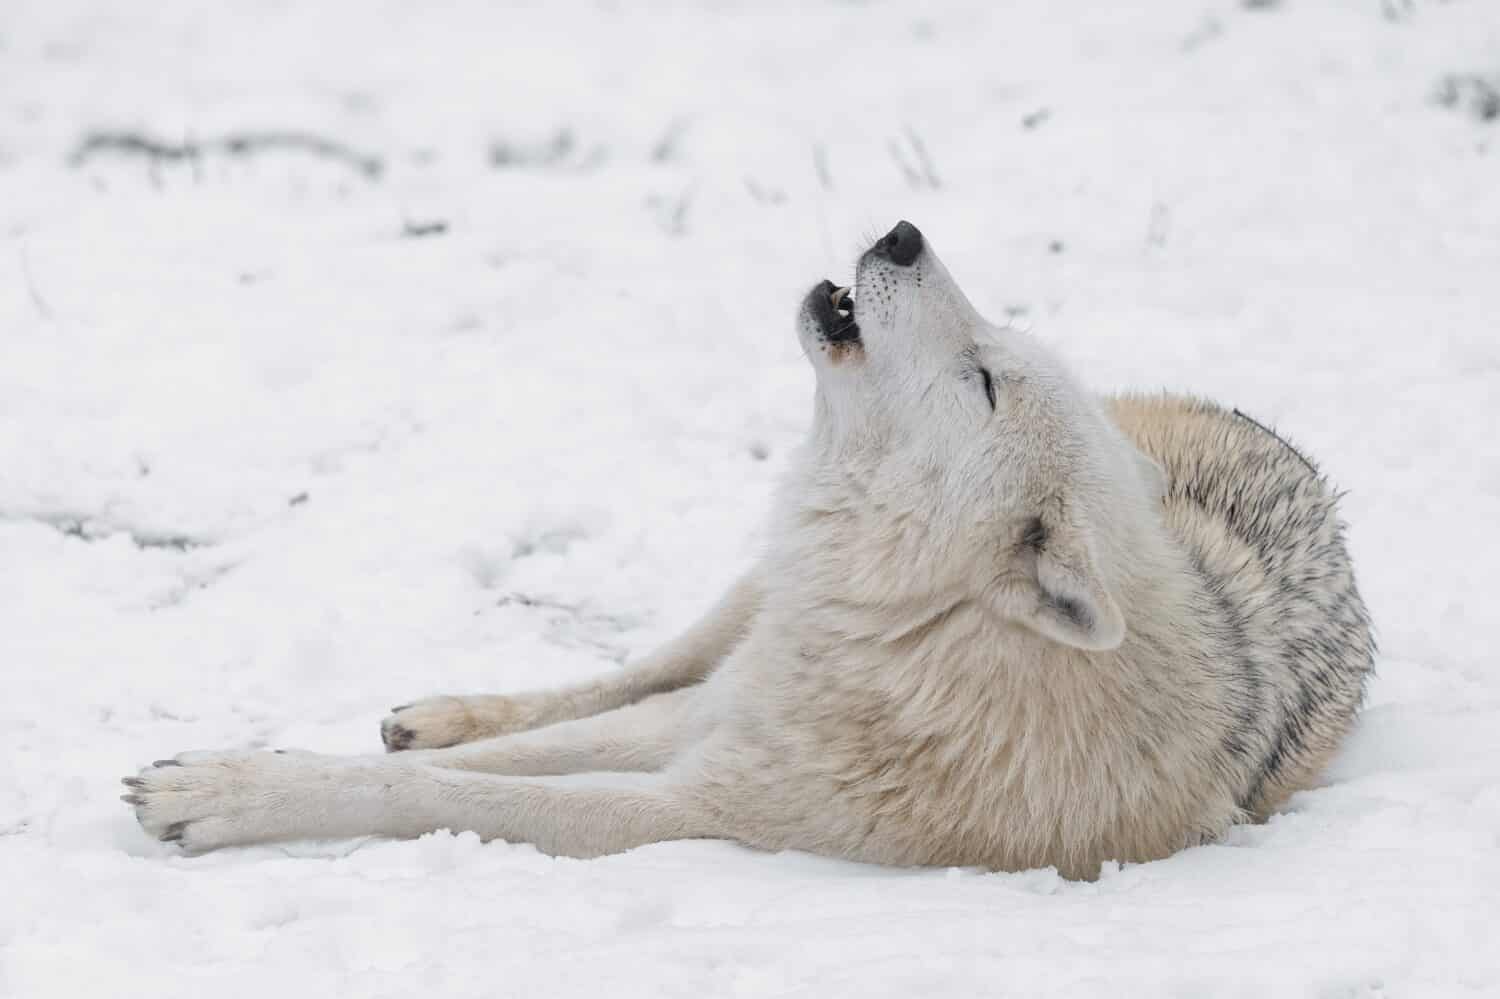 Hudson Bay wolf (Canis lupus hudsonicus) howling.